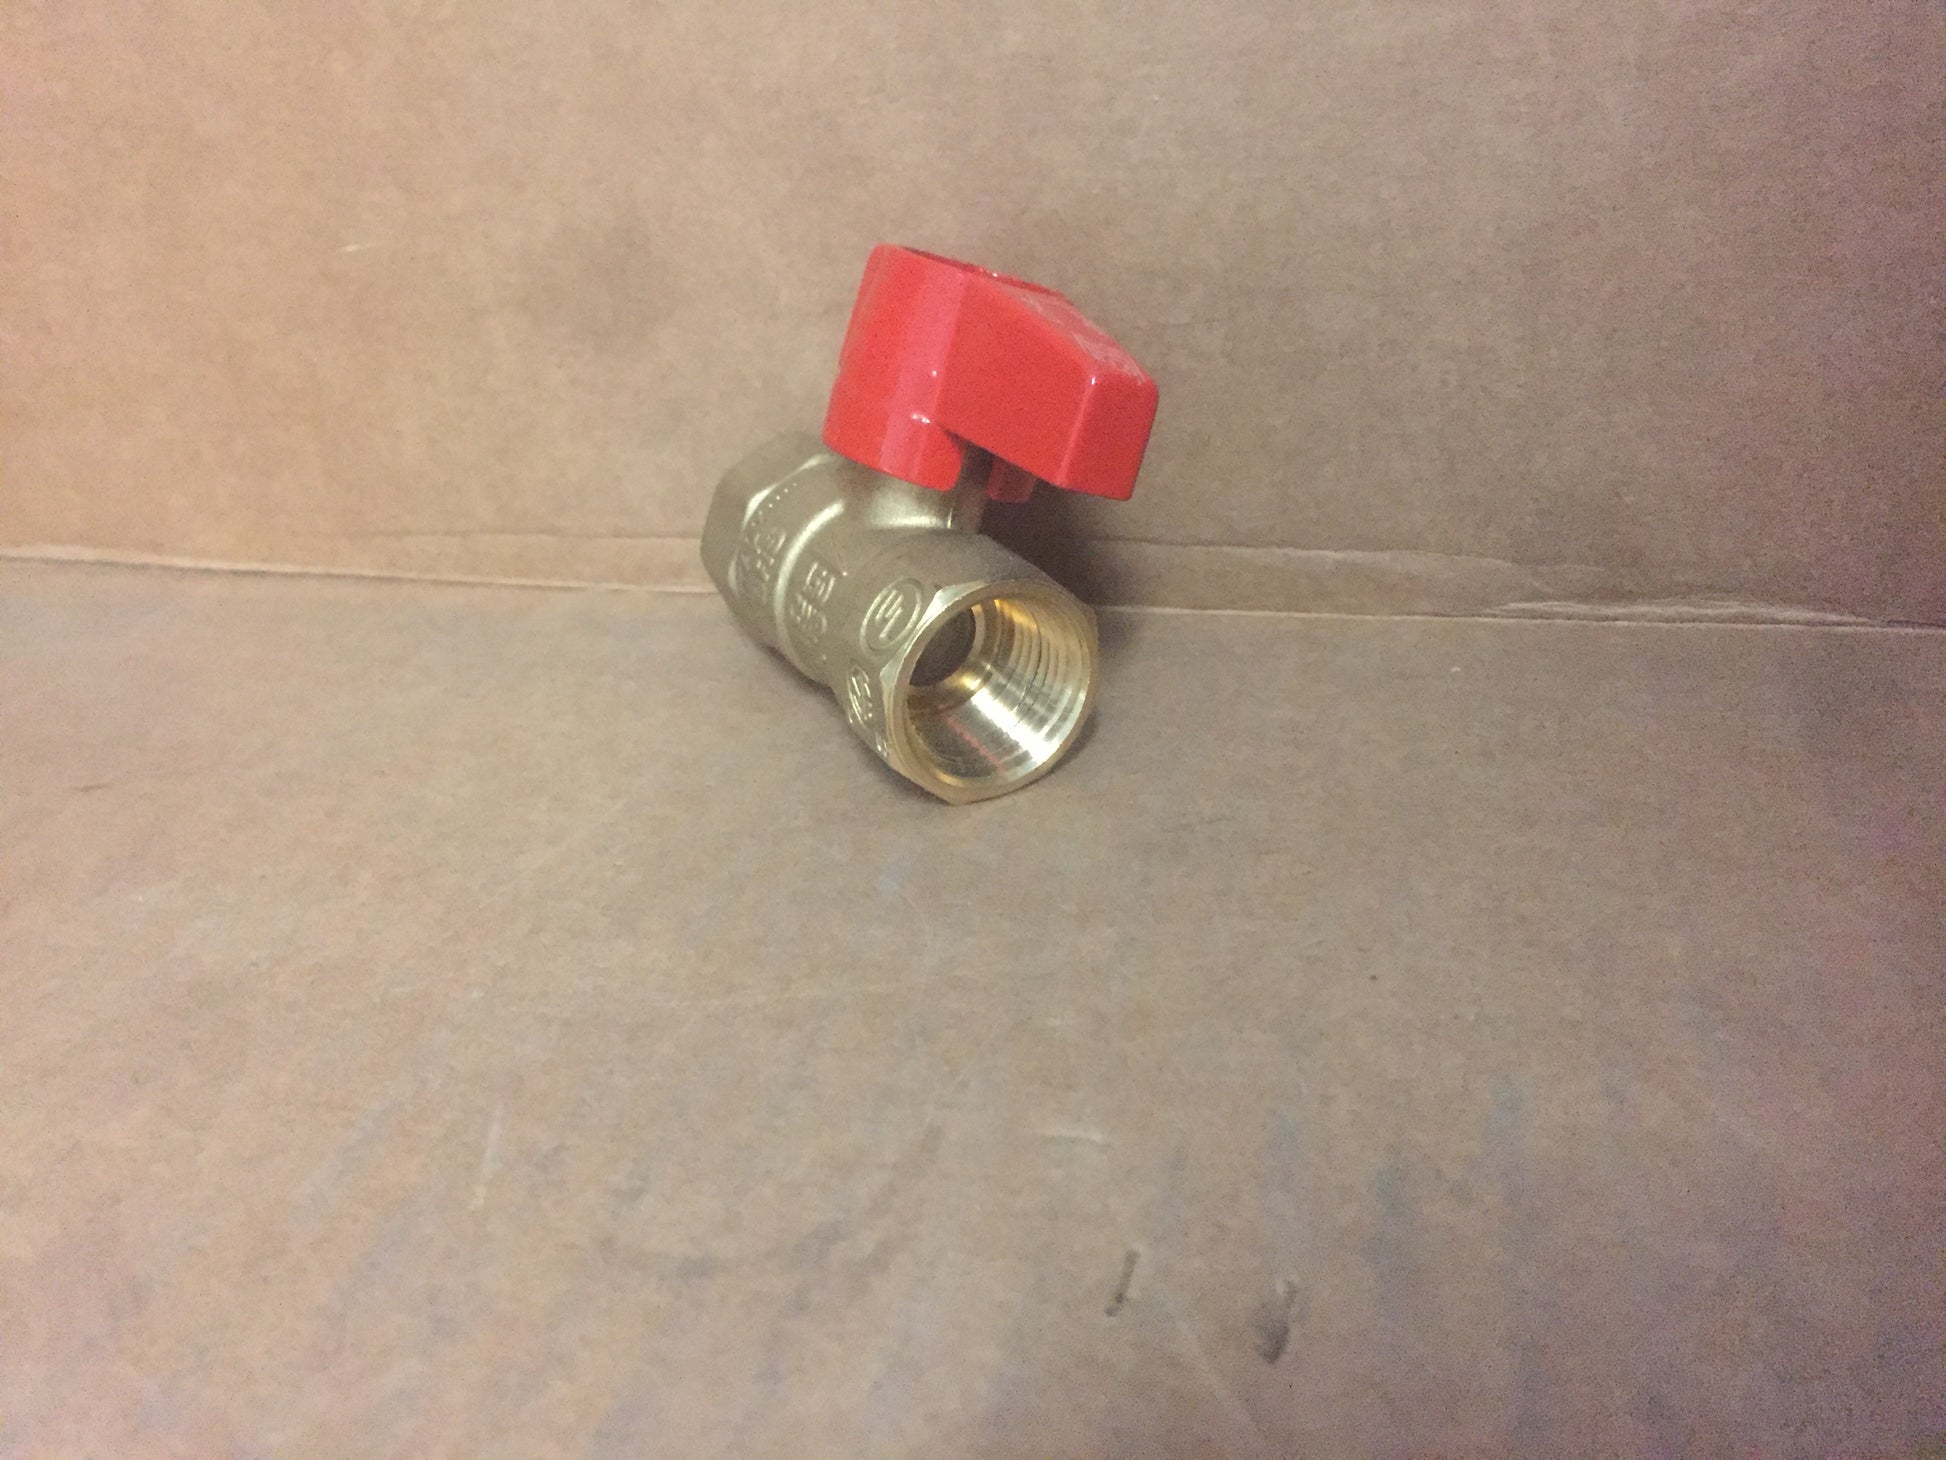 Gas Cock Gas Service Ball Valve - Brass - 1/2" Female NPT x 1/2" Female NPT with Aluminum Red Wedge Handle